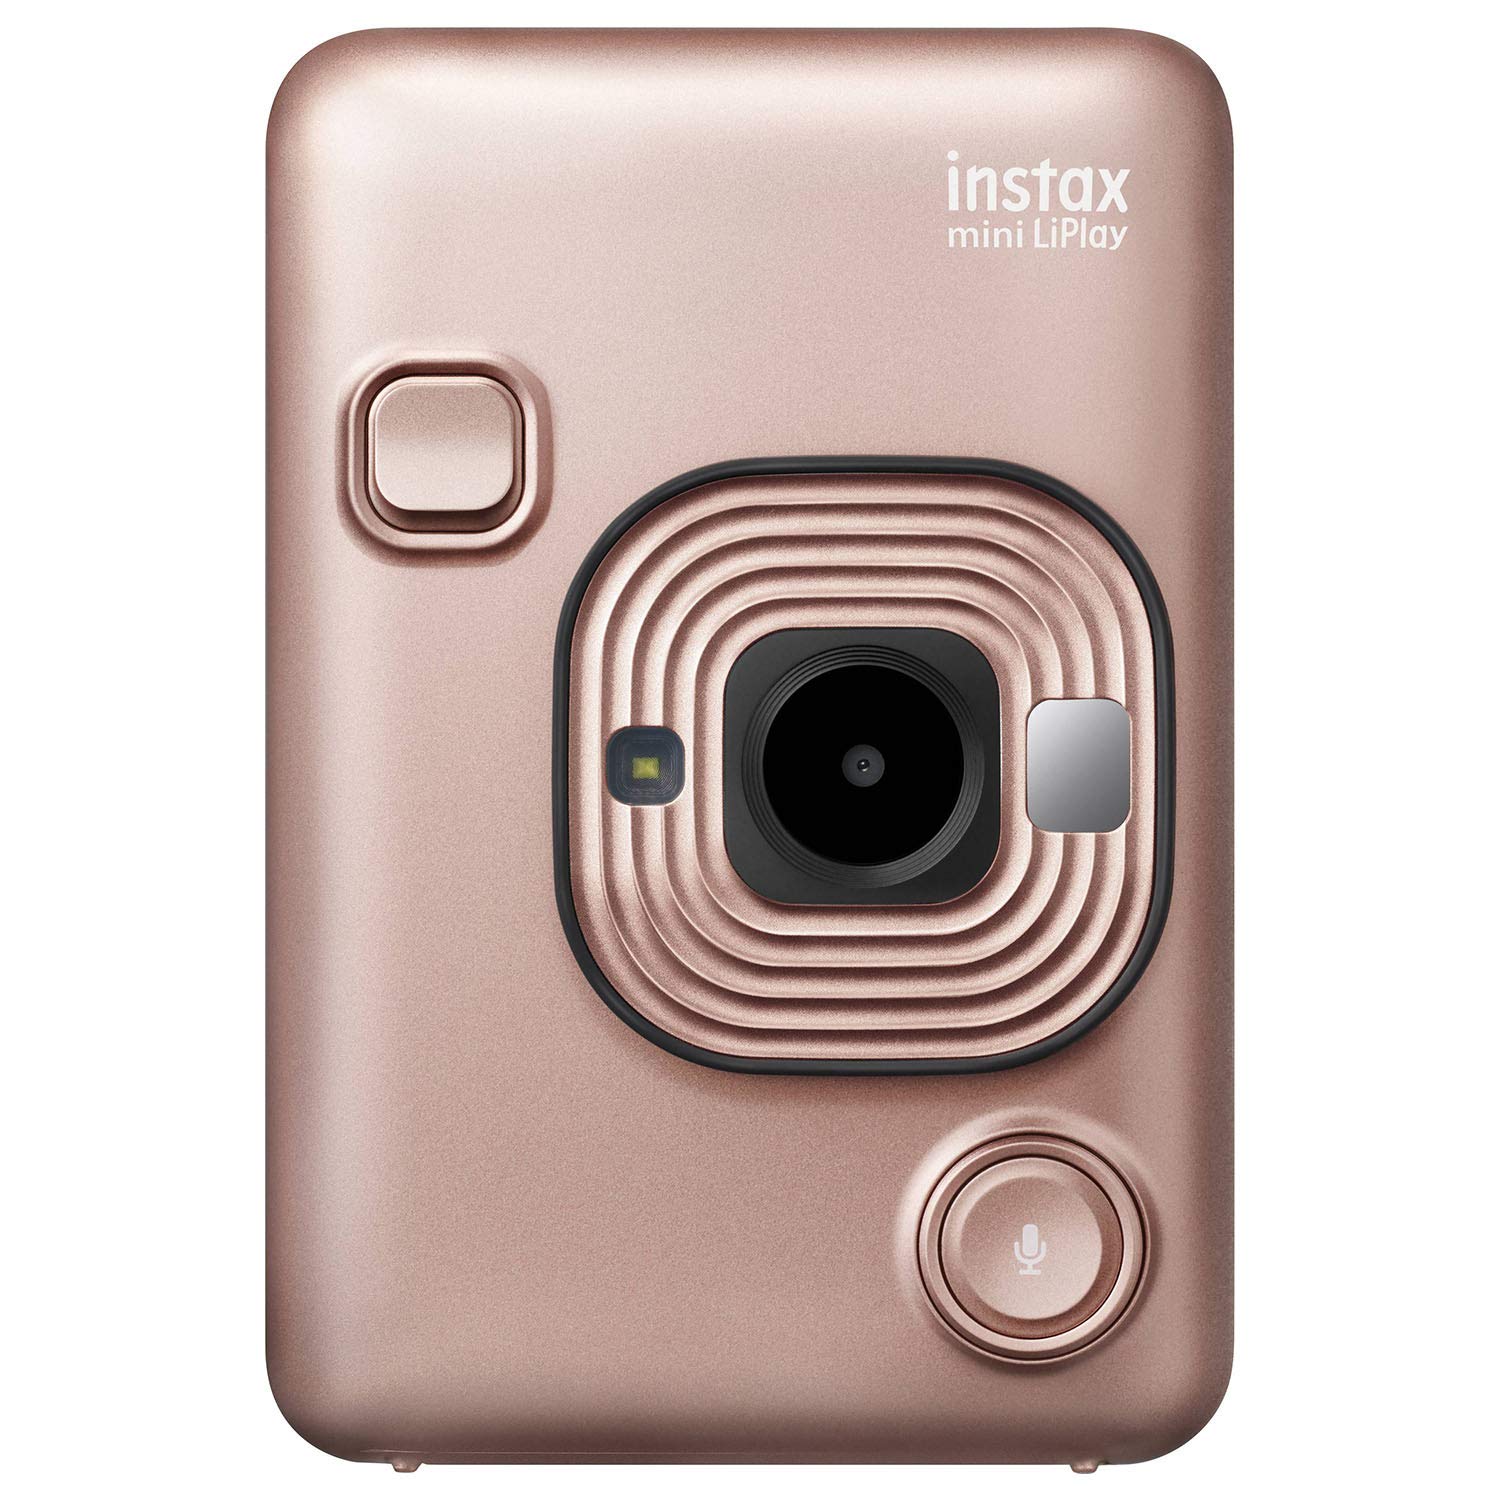 Unleashing Fun with the Mighty LiPlay Hybrid Instant Camera